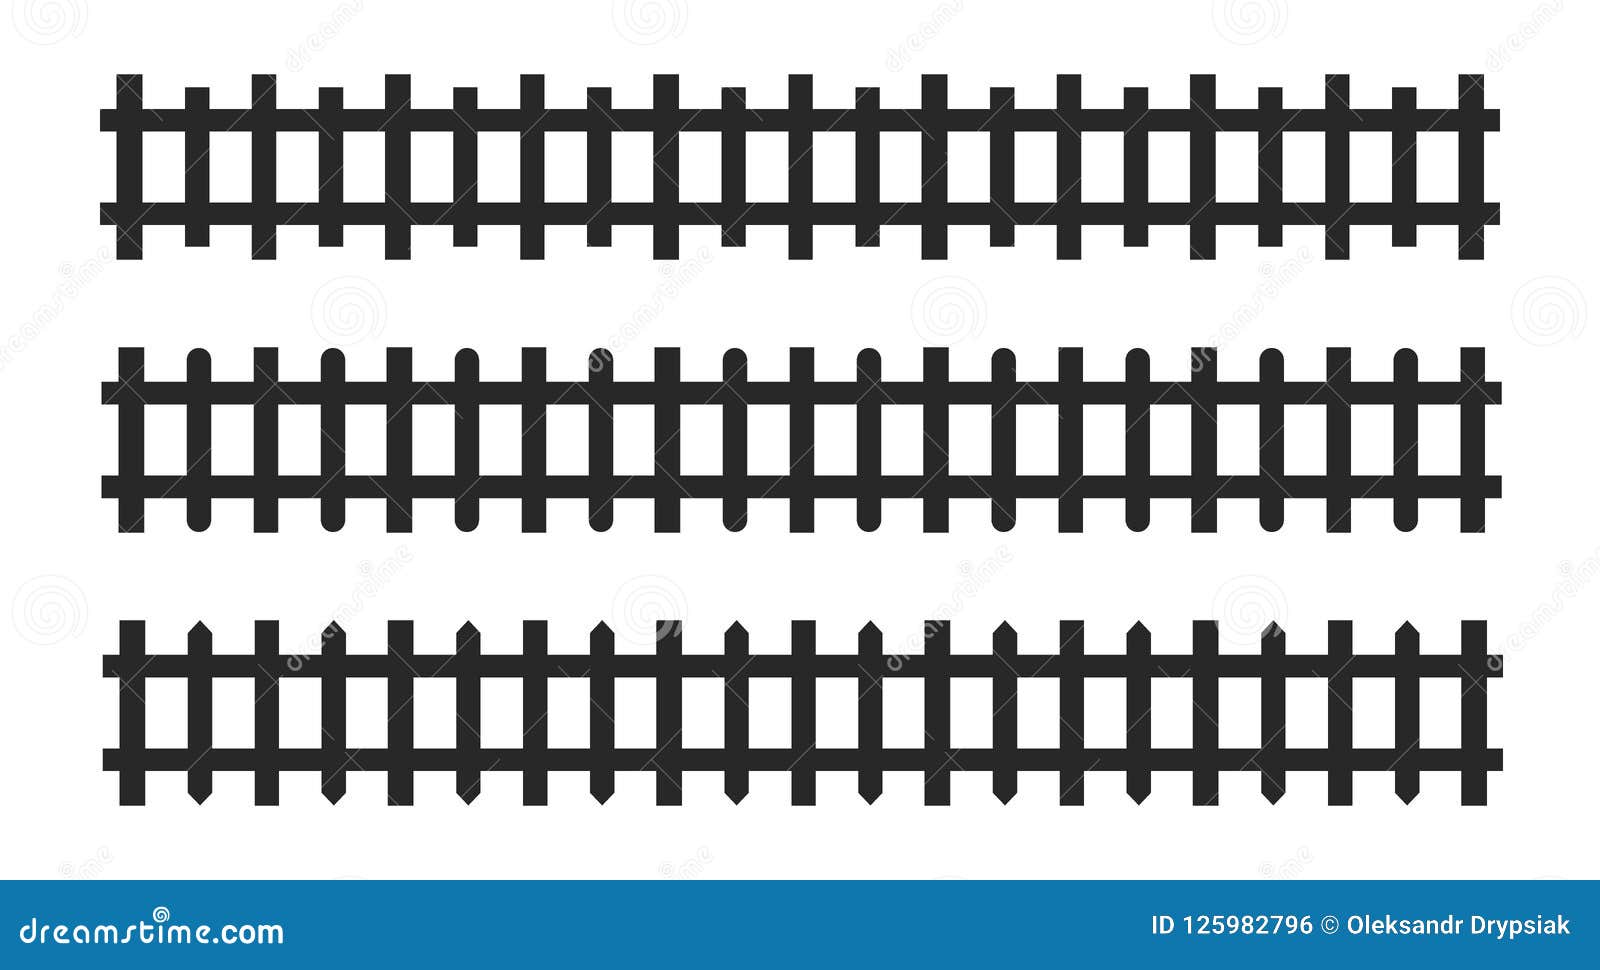 Black Picket Fence Symbols and Signs. Isolated Vector Illustration on ...